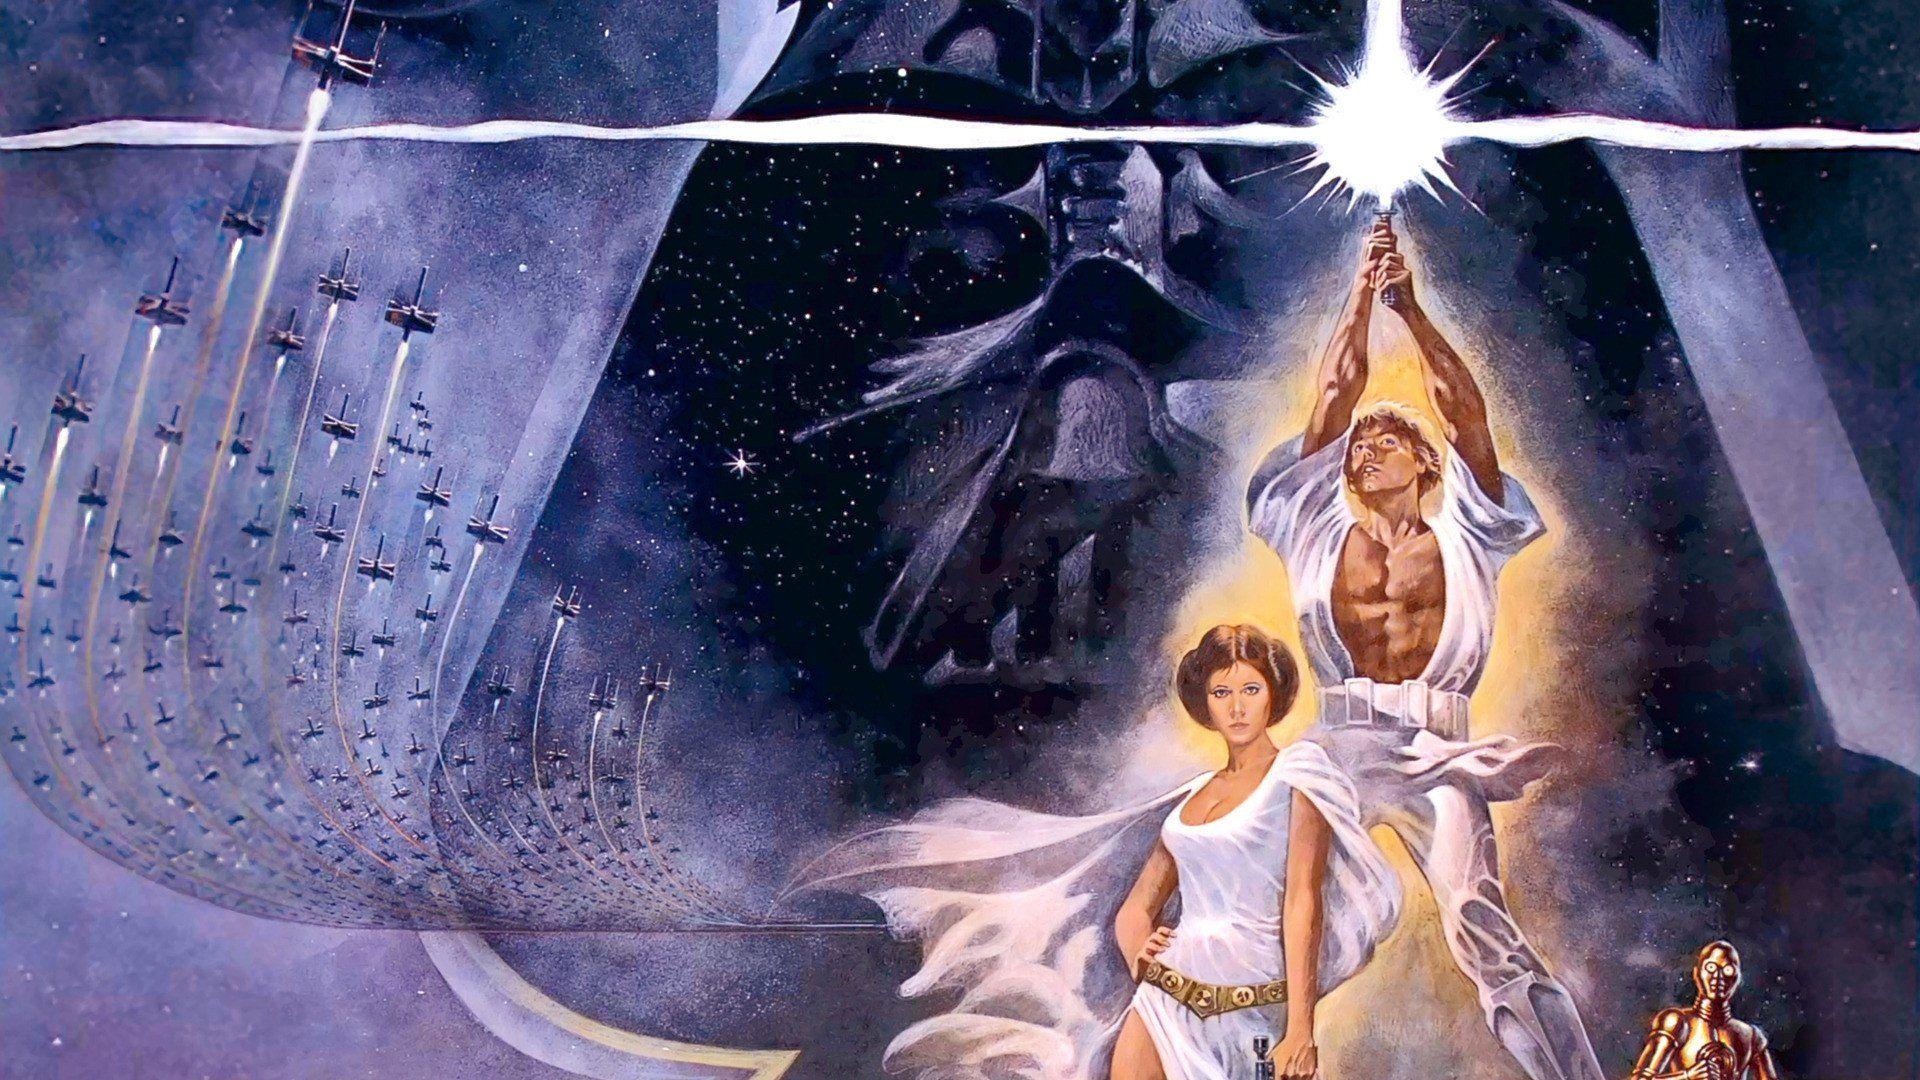 Star Wars Episode IV: A New Hope HD Wallpaper. Background